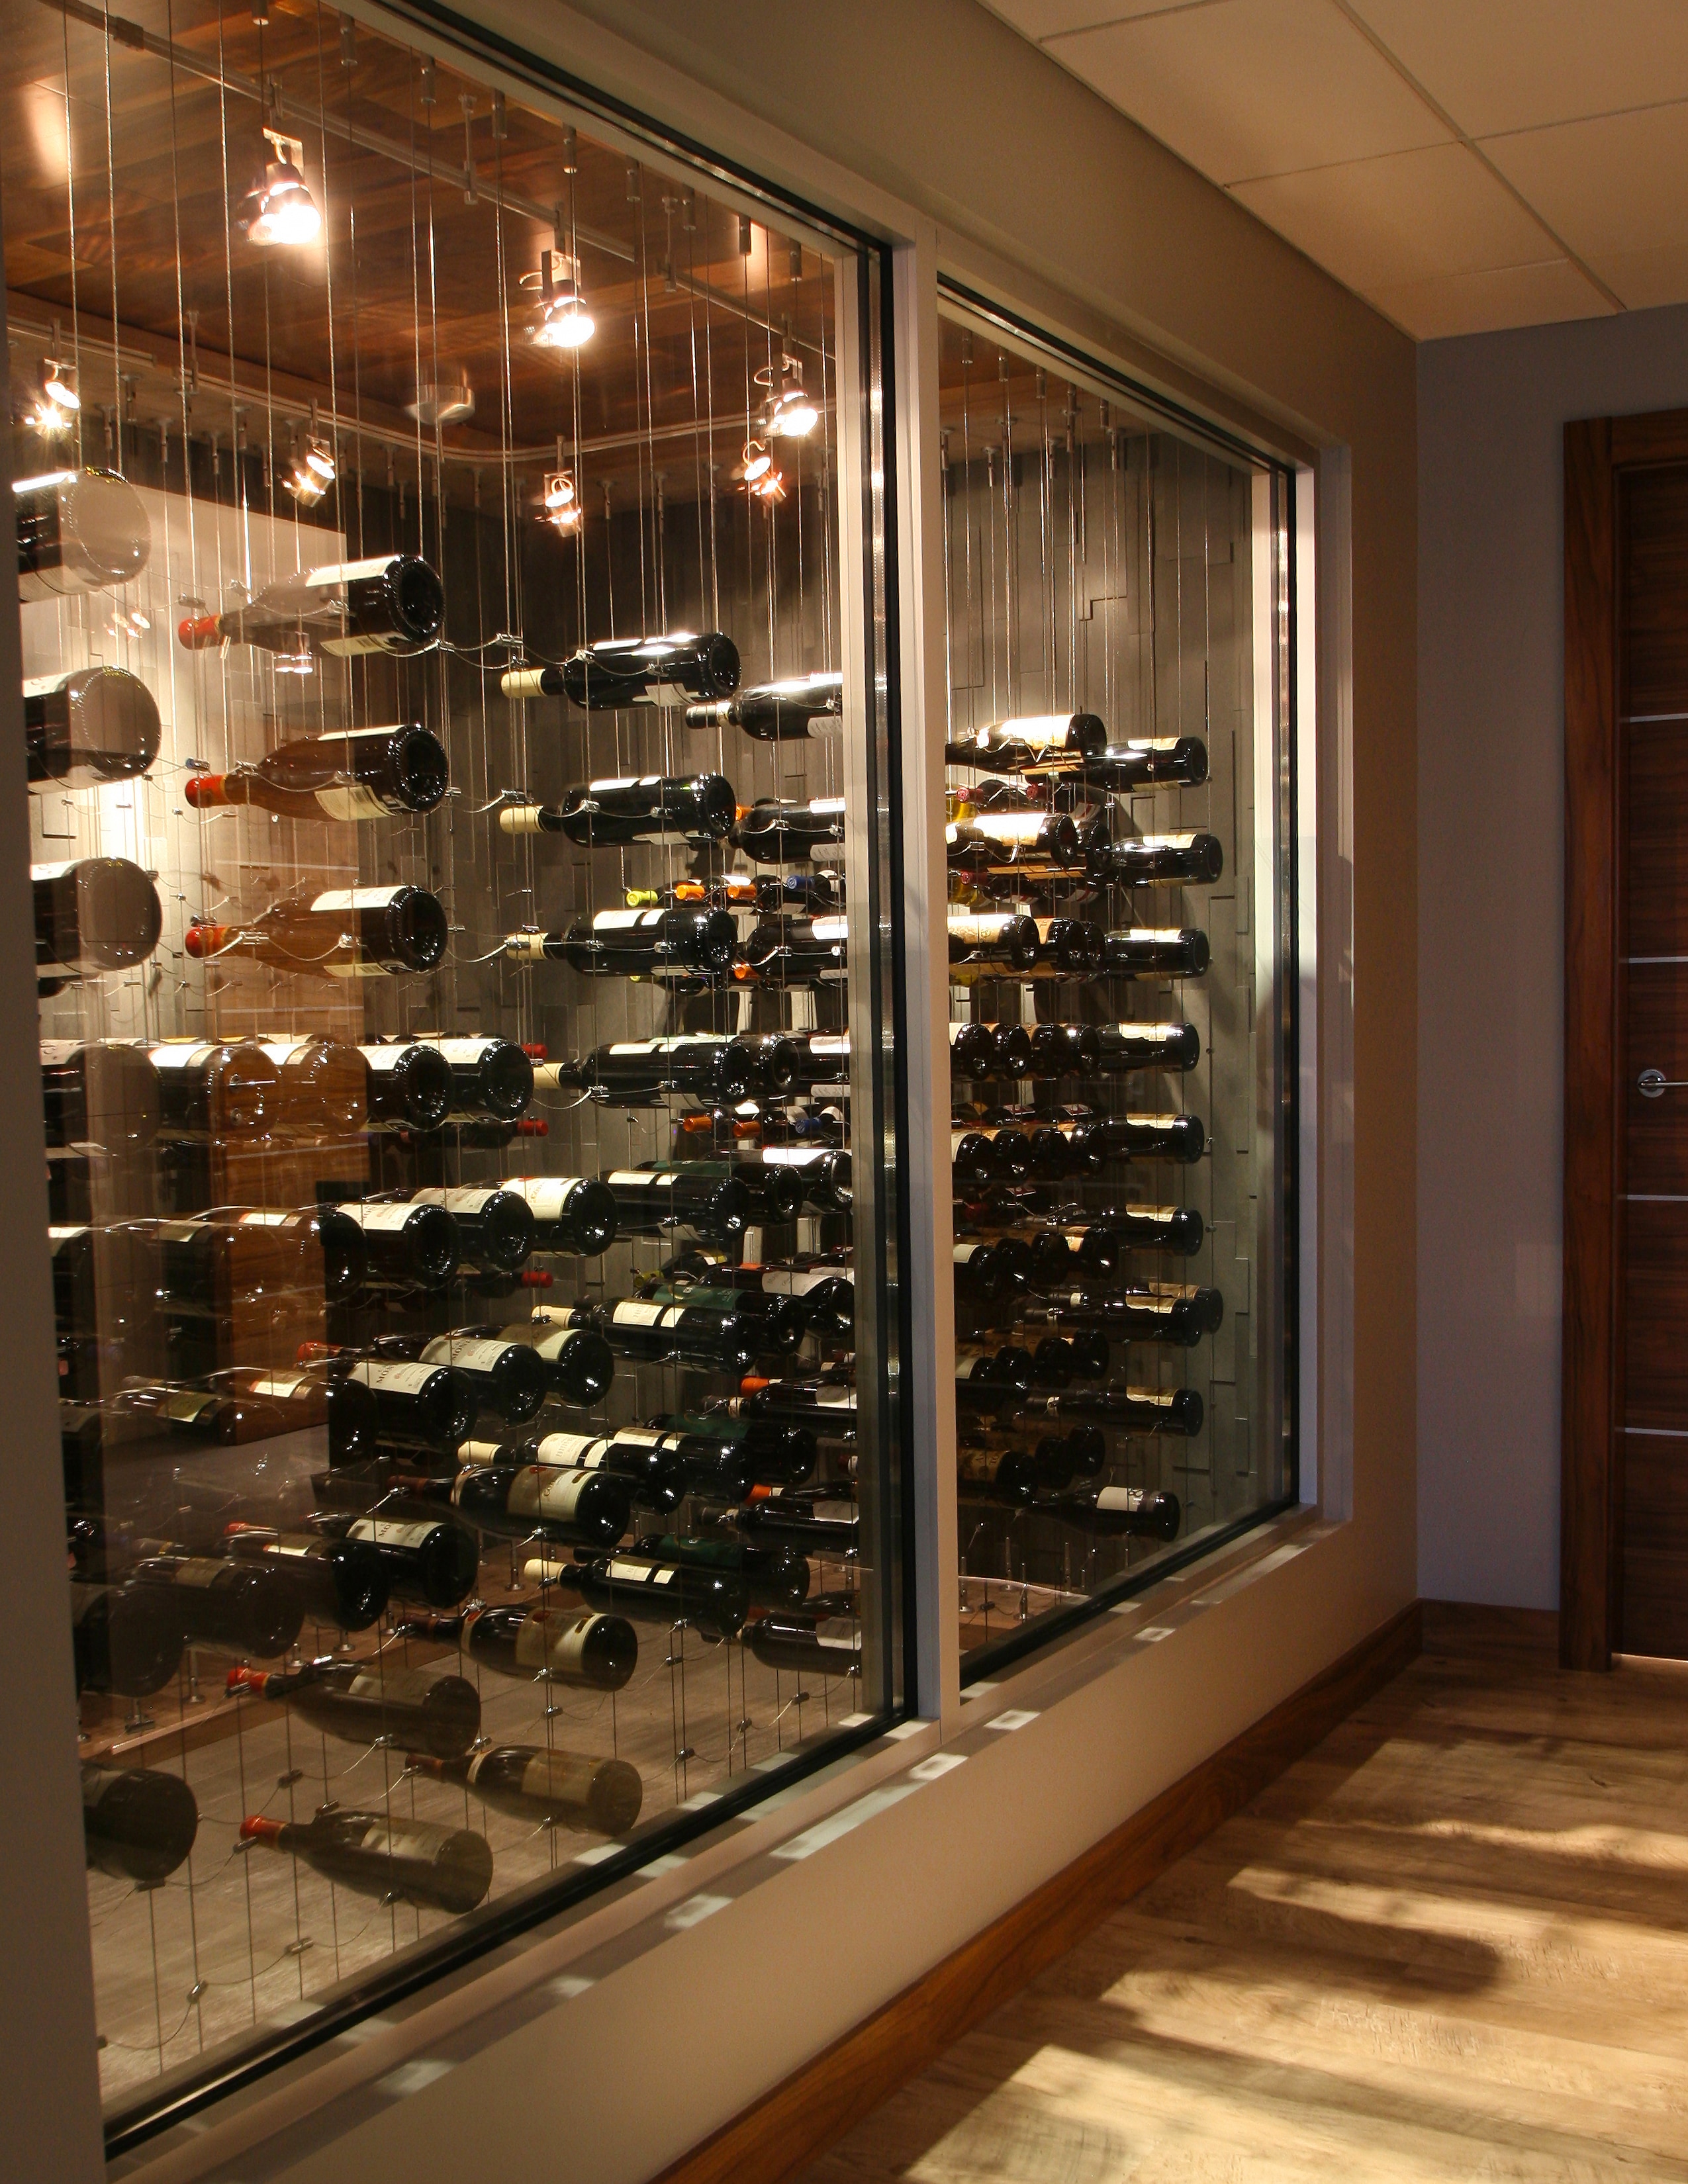 Get a wine cellar design quote now! Click here!